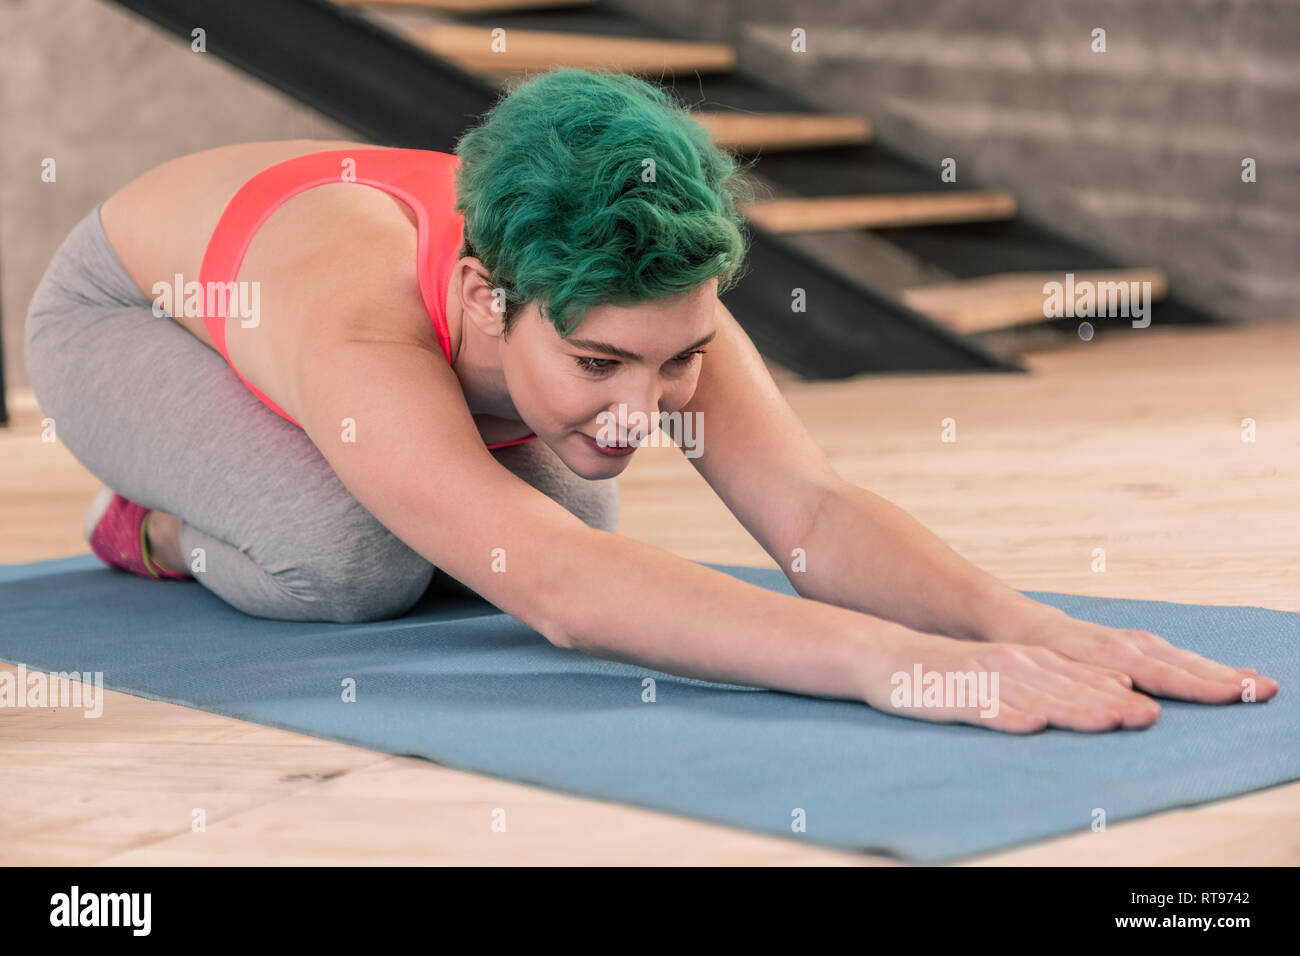 Beautiful green-haired woman attending fitness center after work Stock Photo